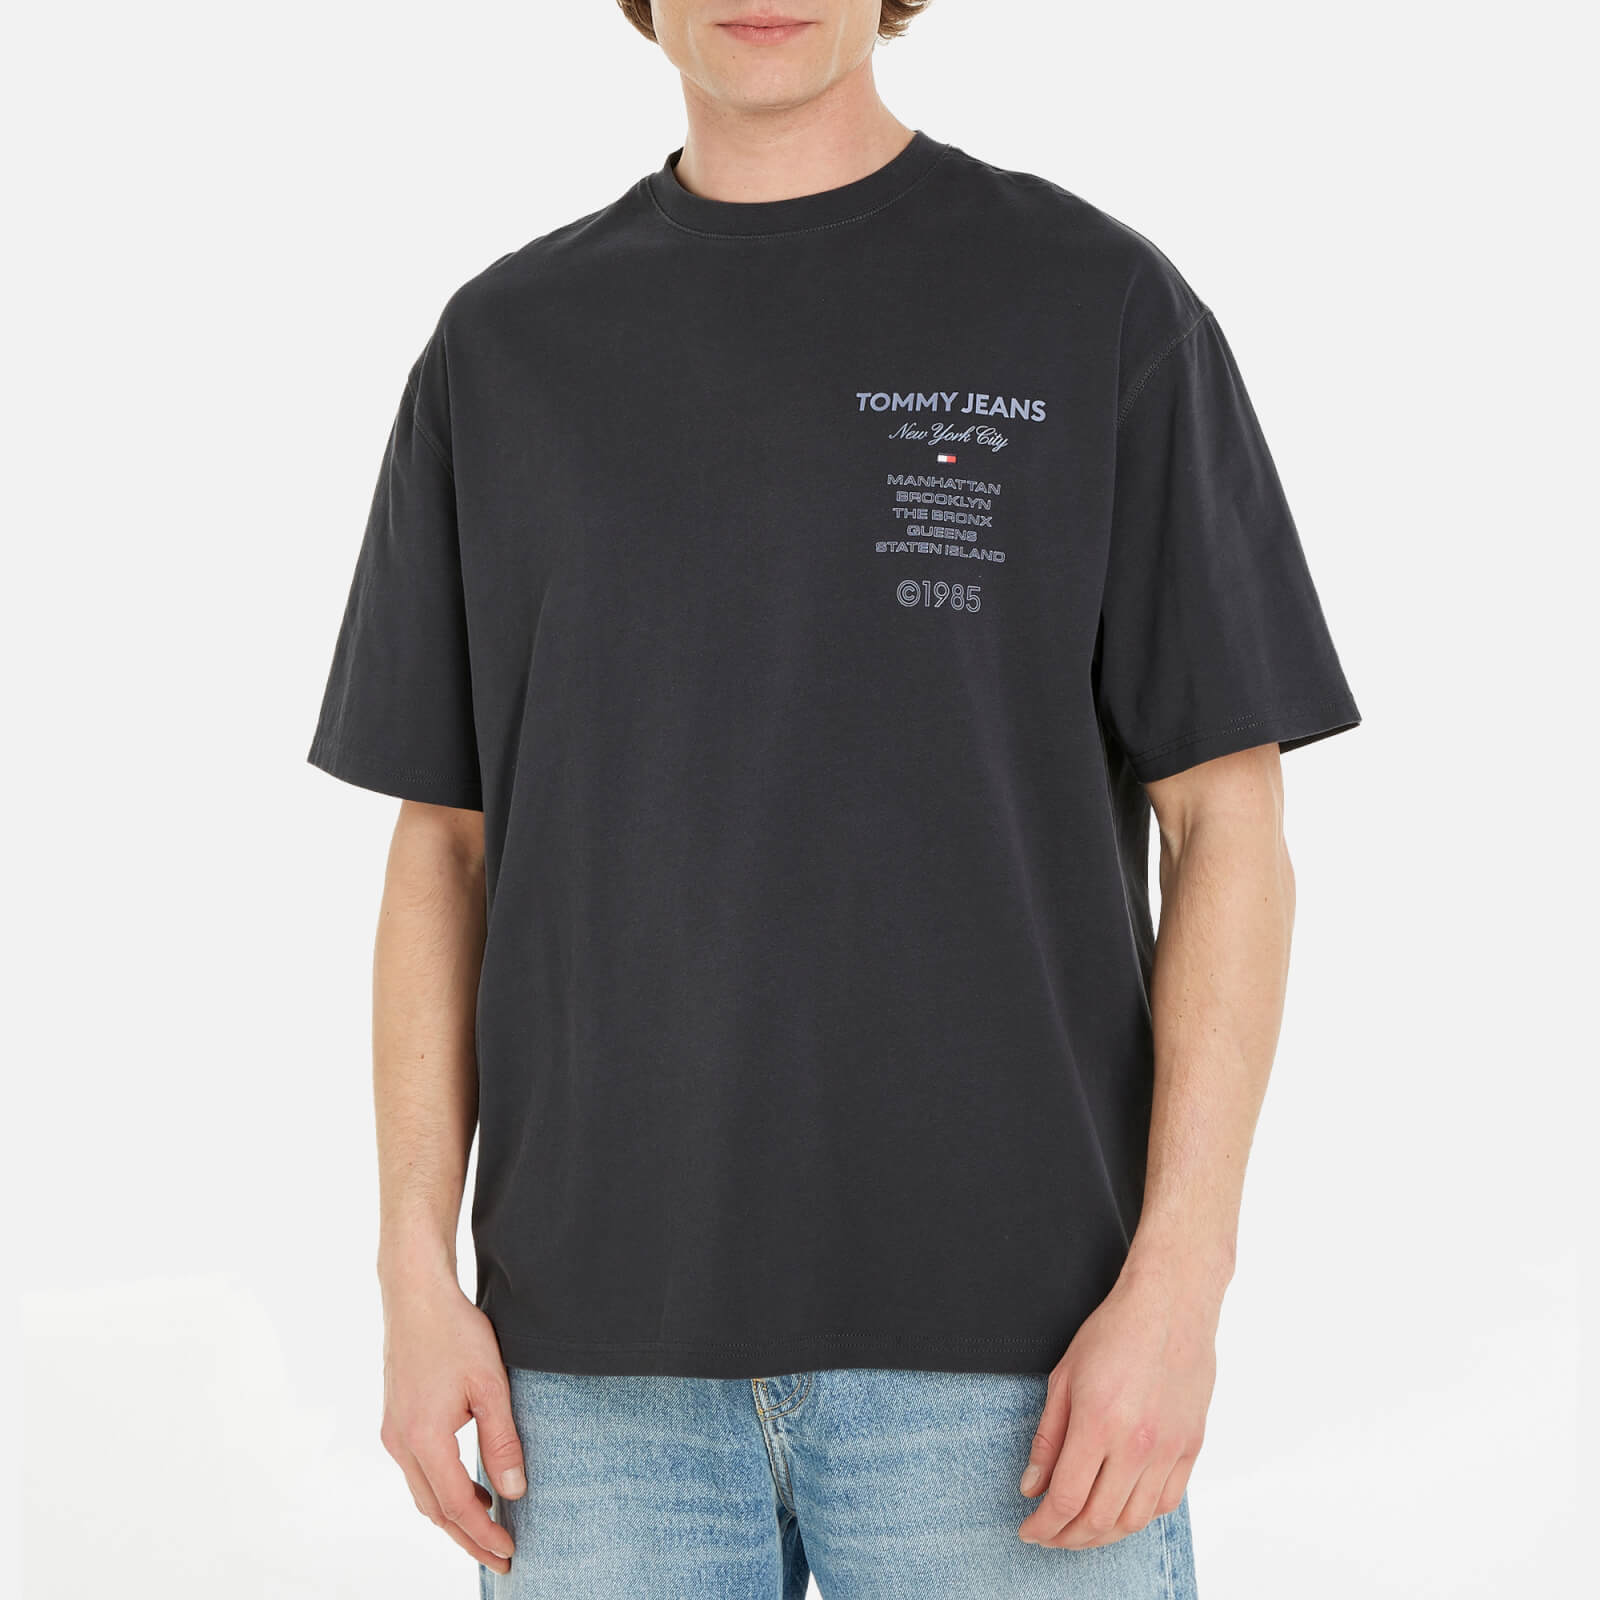 Tommy Jeans NYC 1985 Cities Cotton-Jersey T-Shirt